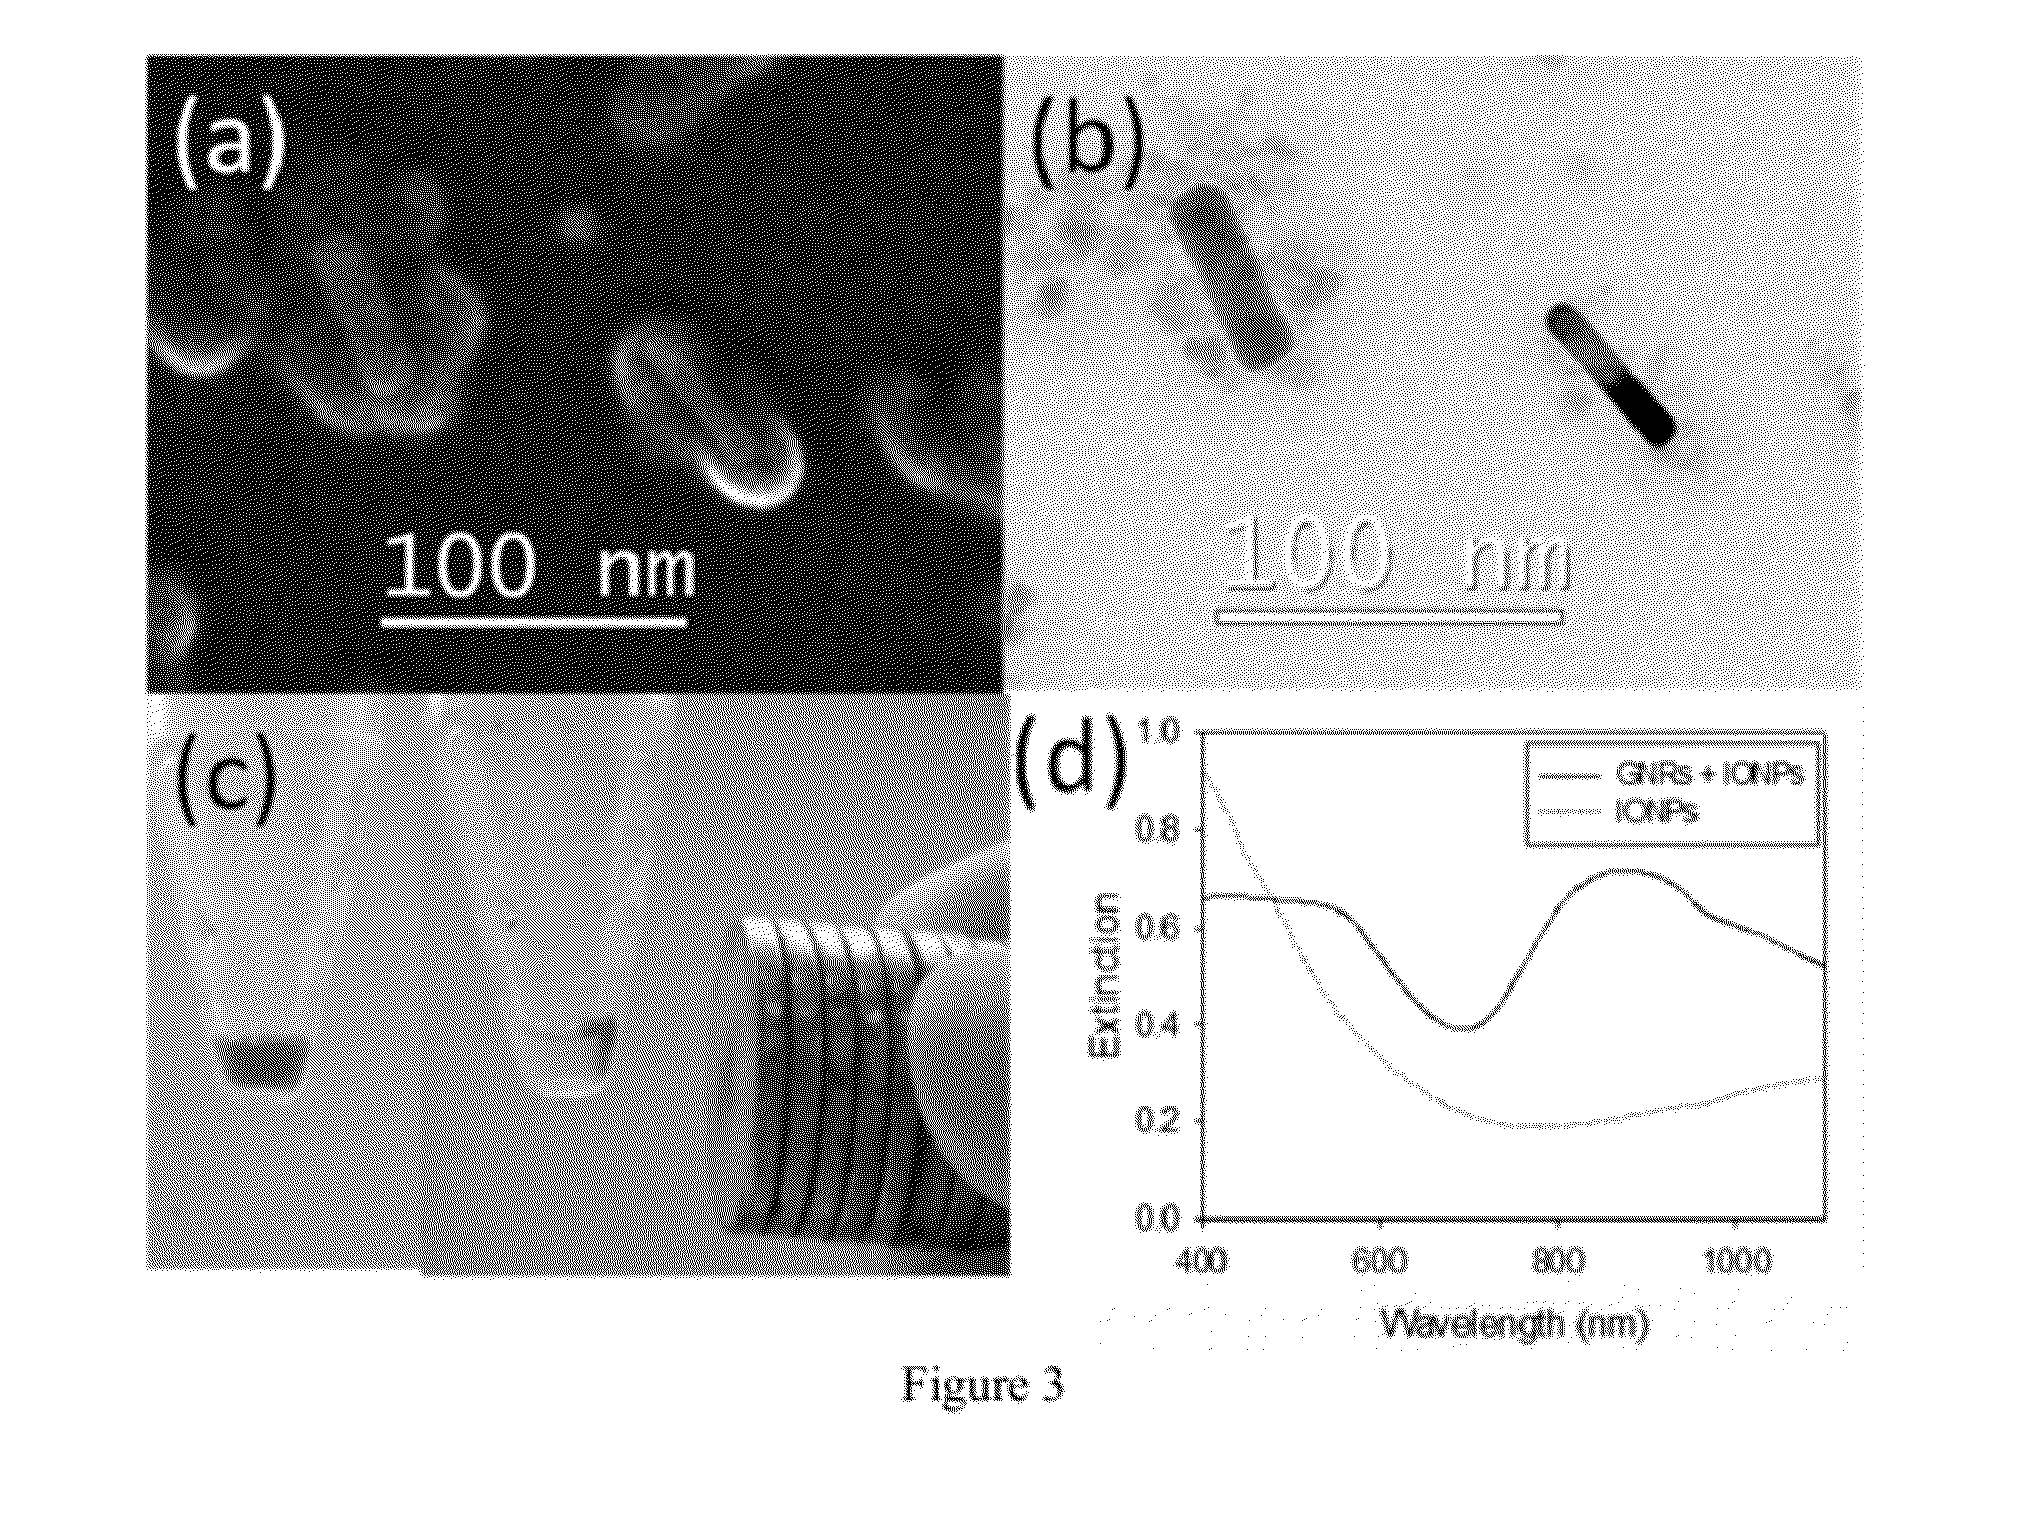 Multifunctional Metal Nanoparticles Having A Polydopamine-Based Surface and Methods of Making and Using the Same